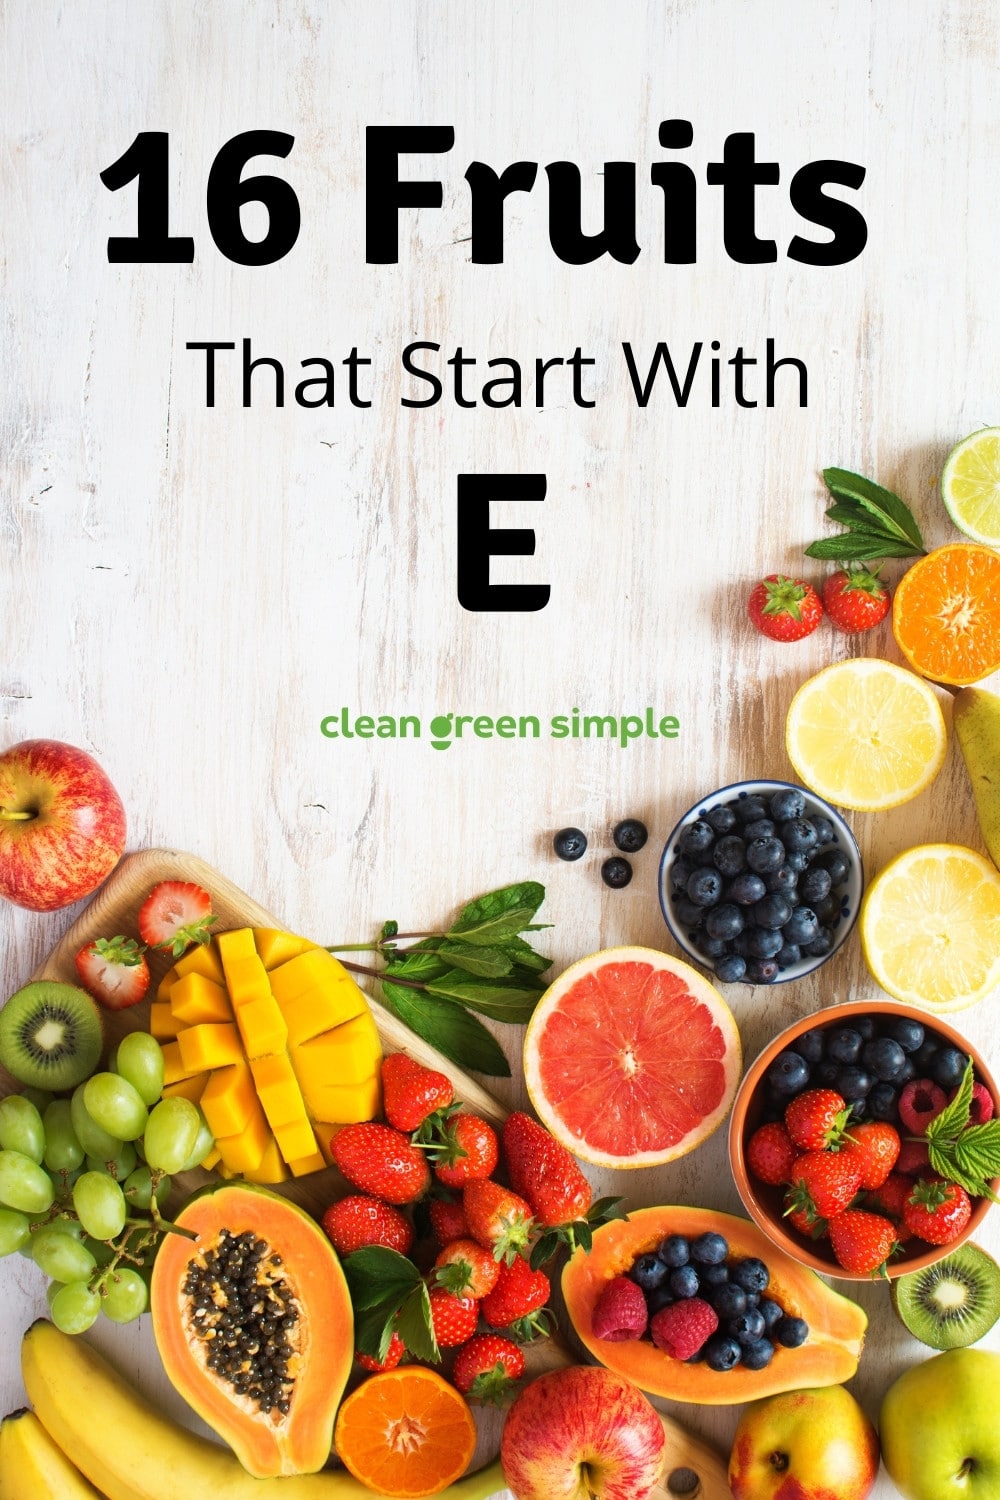 16 Fruits that start with E